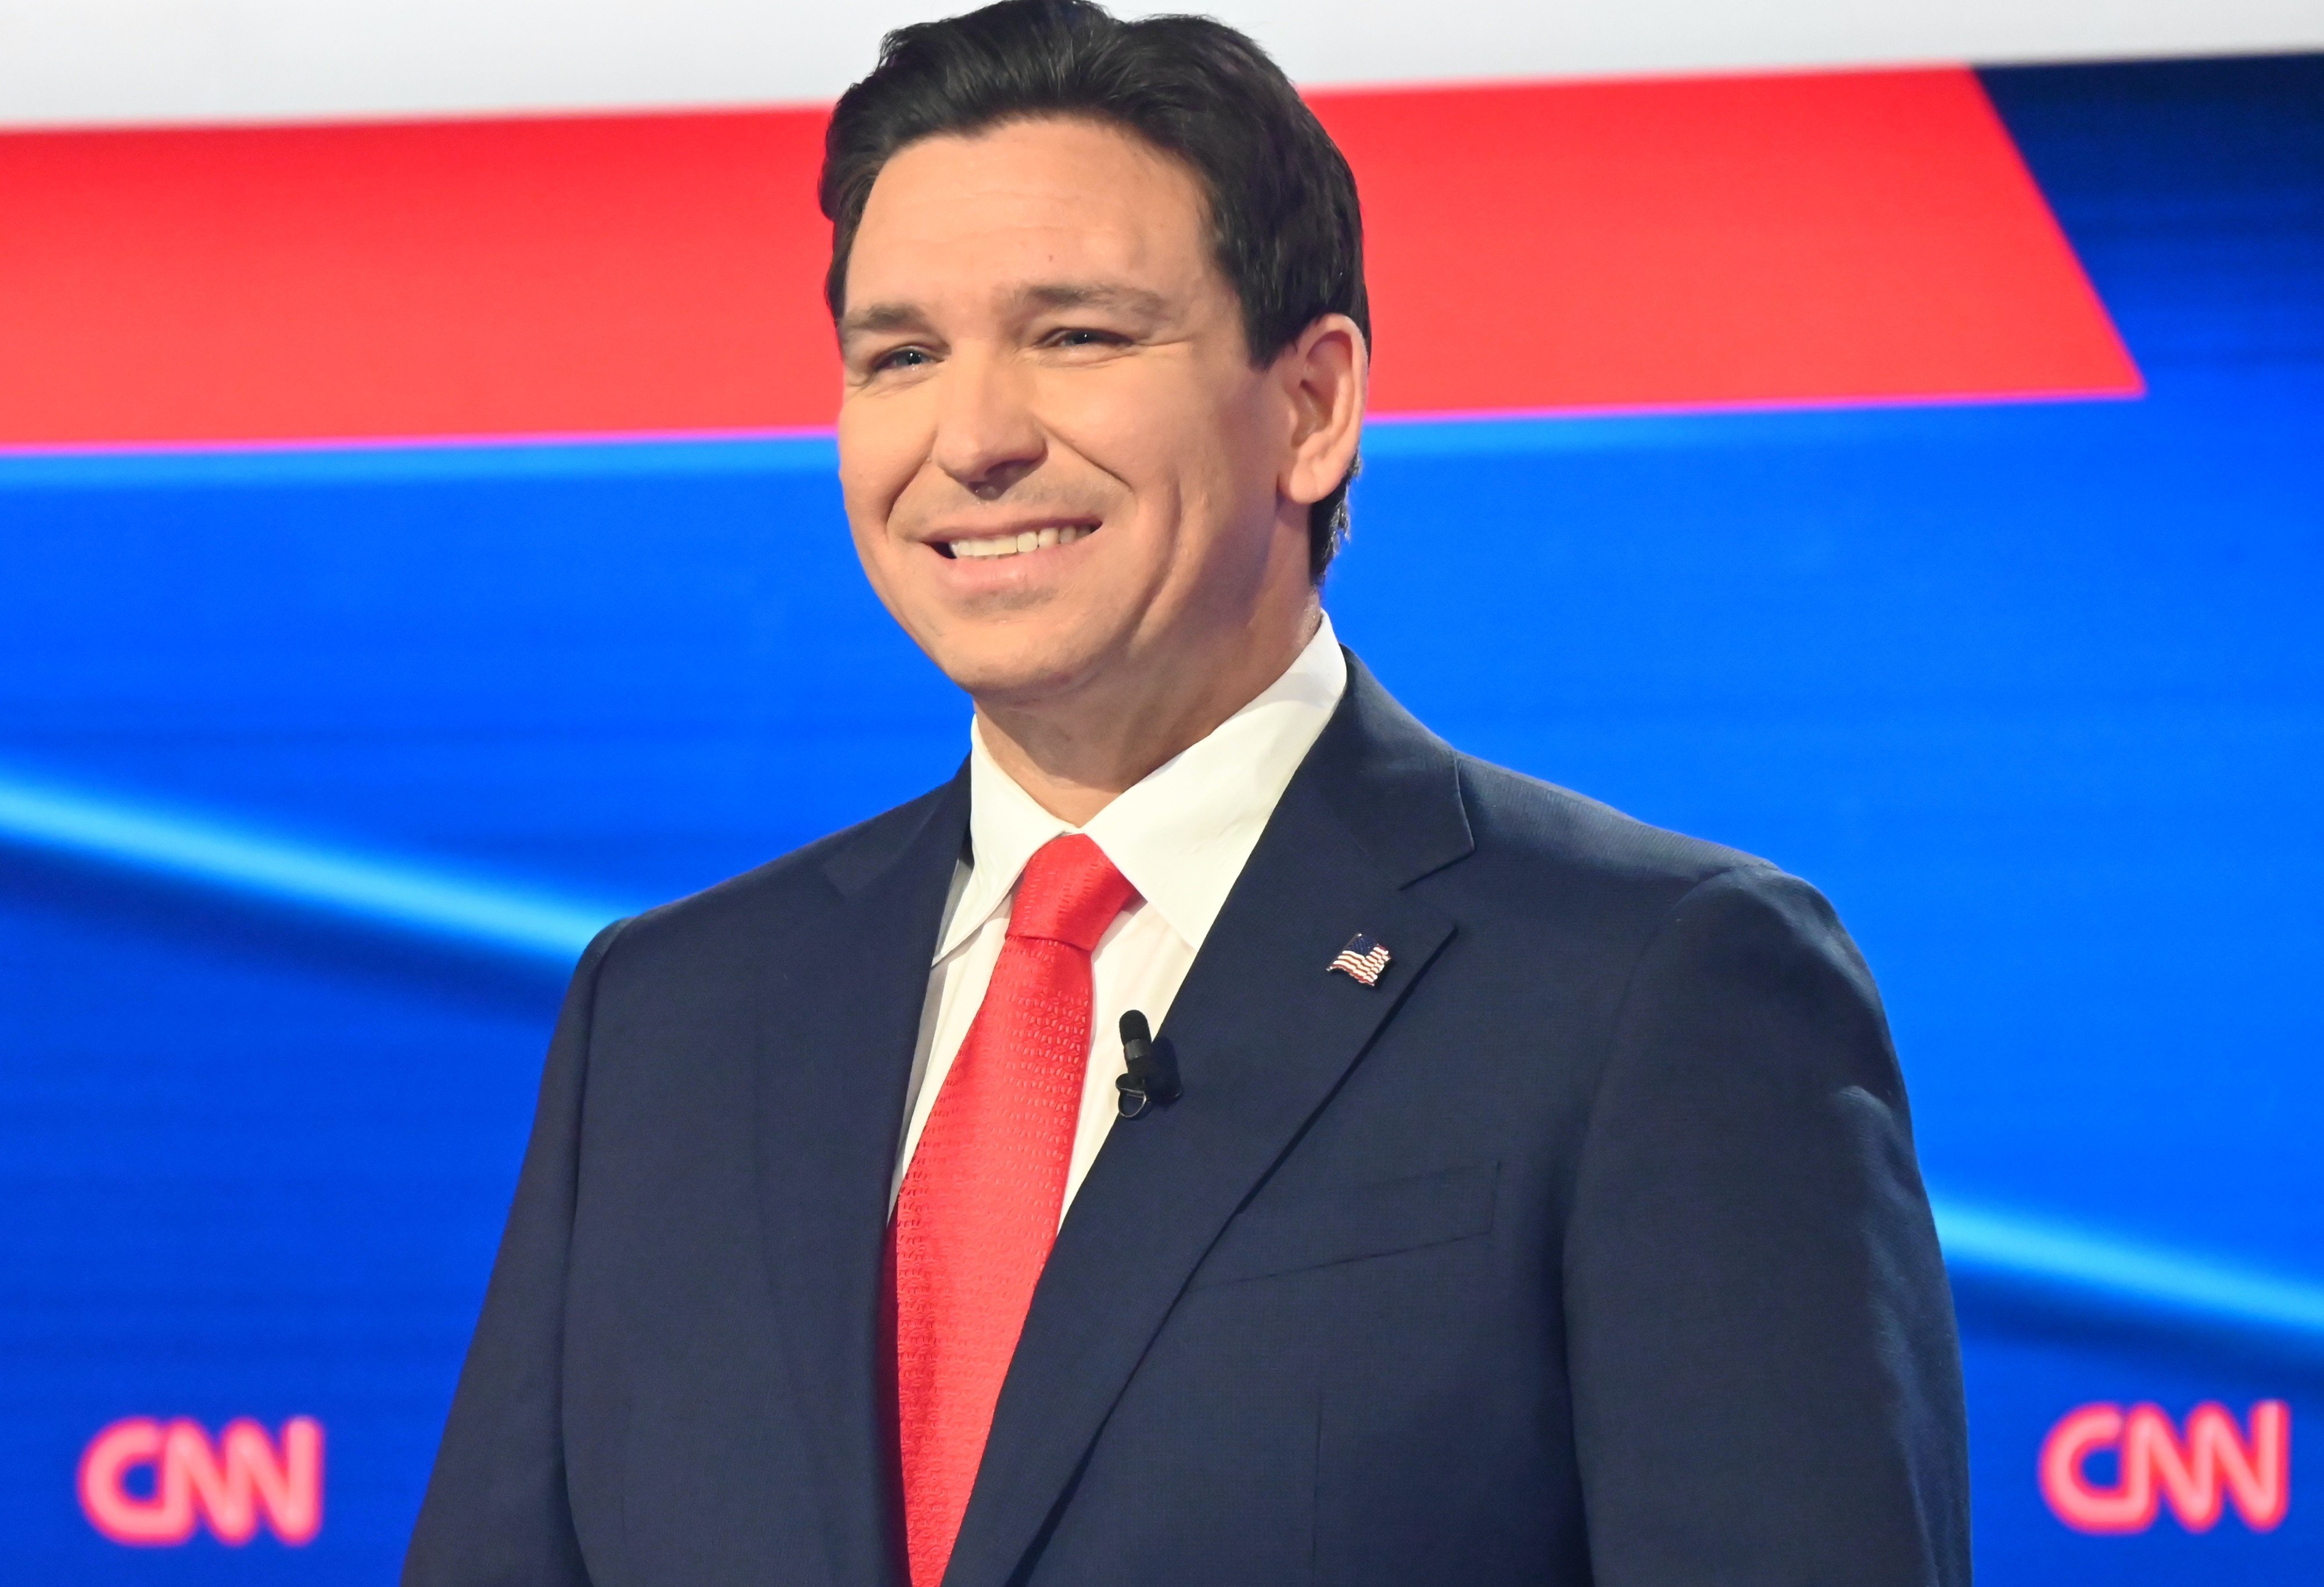 Florida Governor Ron DeSantis on Wednesday in Des Moines at the final Republican presidential debate before the Iowa caucuses. Photo: TheNEWS2 via ZUMA/dpa